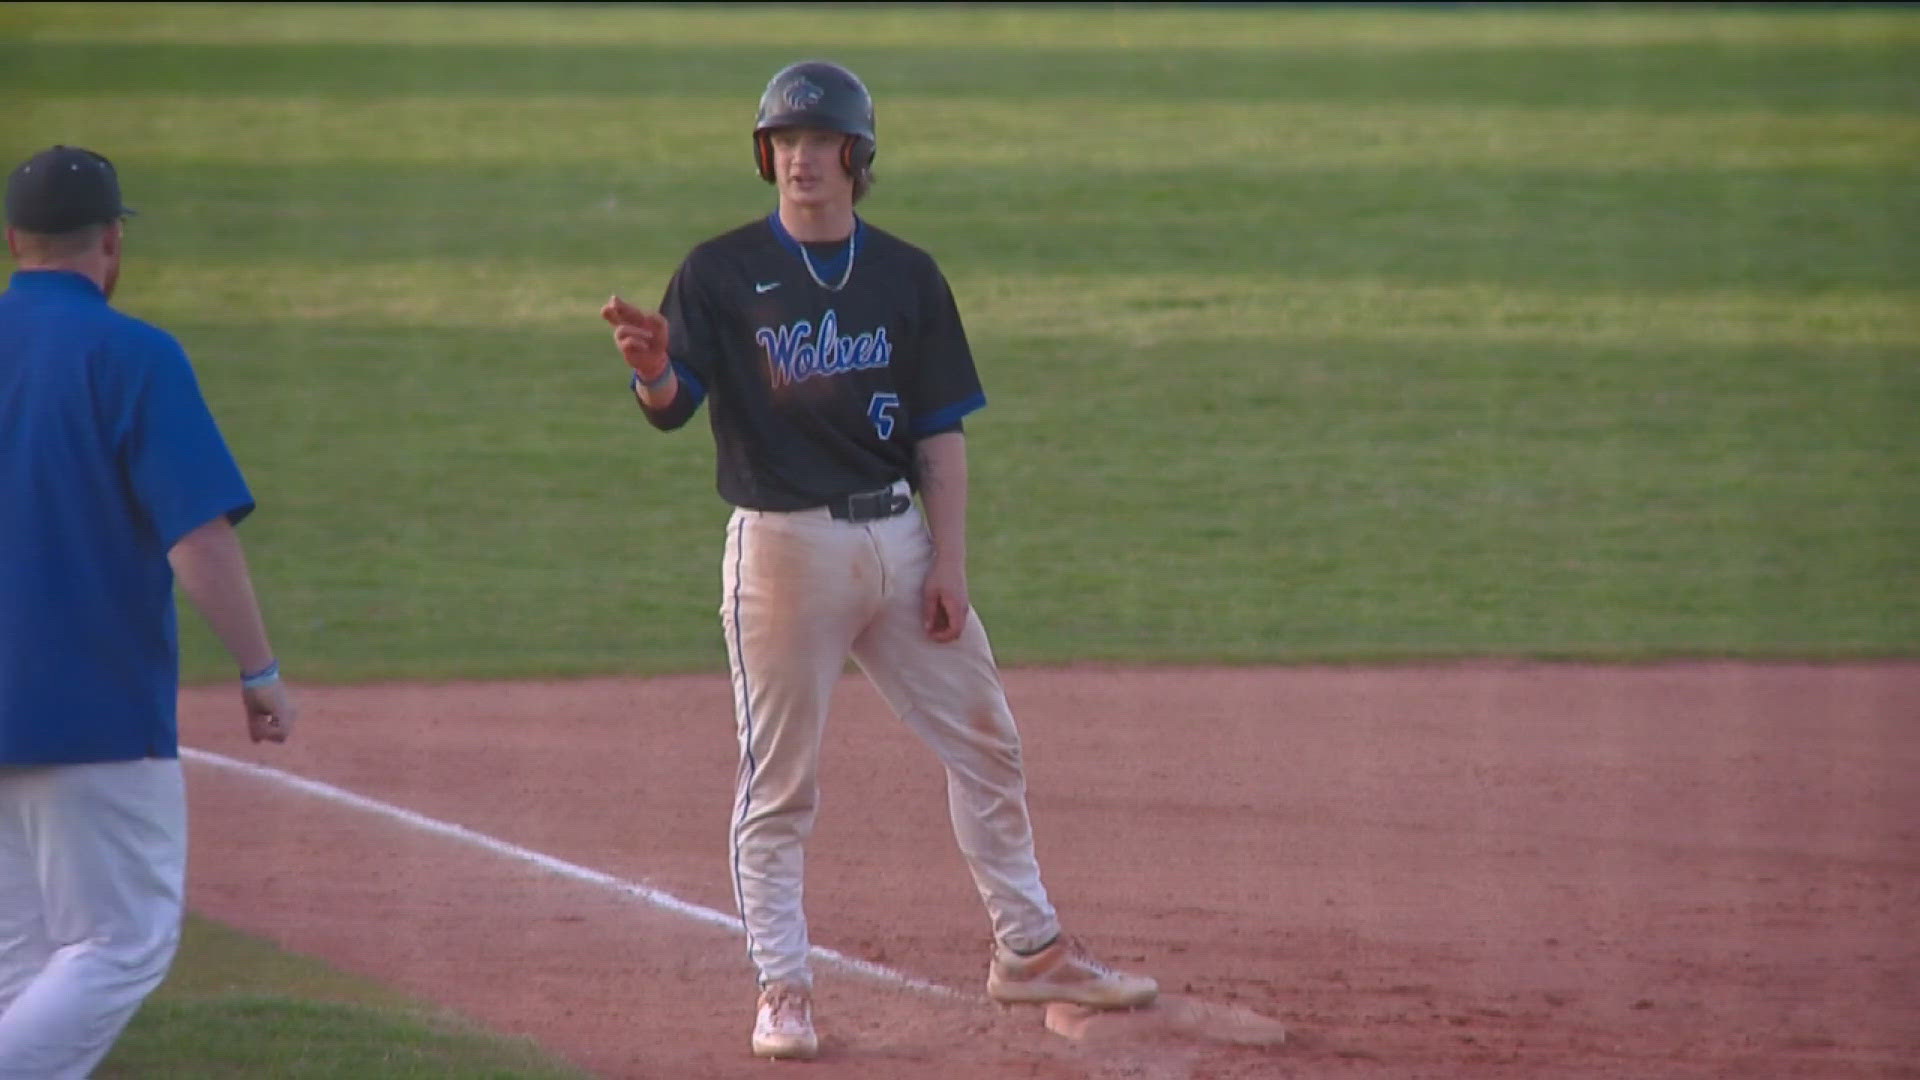 The Wolves (10-8) earned a tough 2-1 win Monday night at home over the Kavemen (6-13). Kuna visits Meridian on Tuesday, while Timberline meets Boise on Thursday.